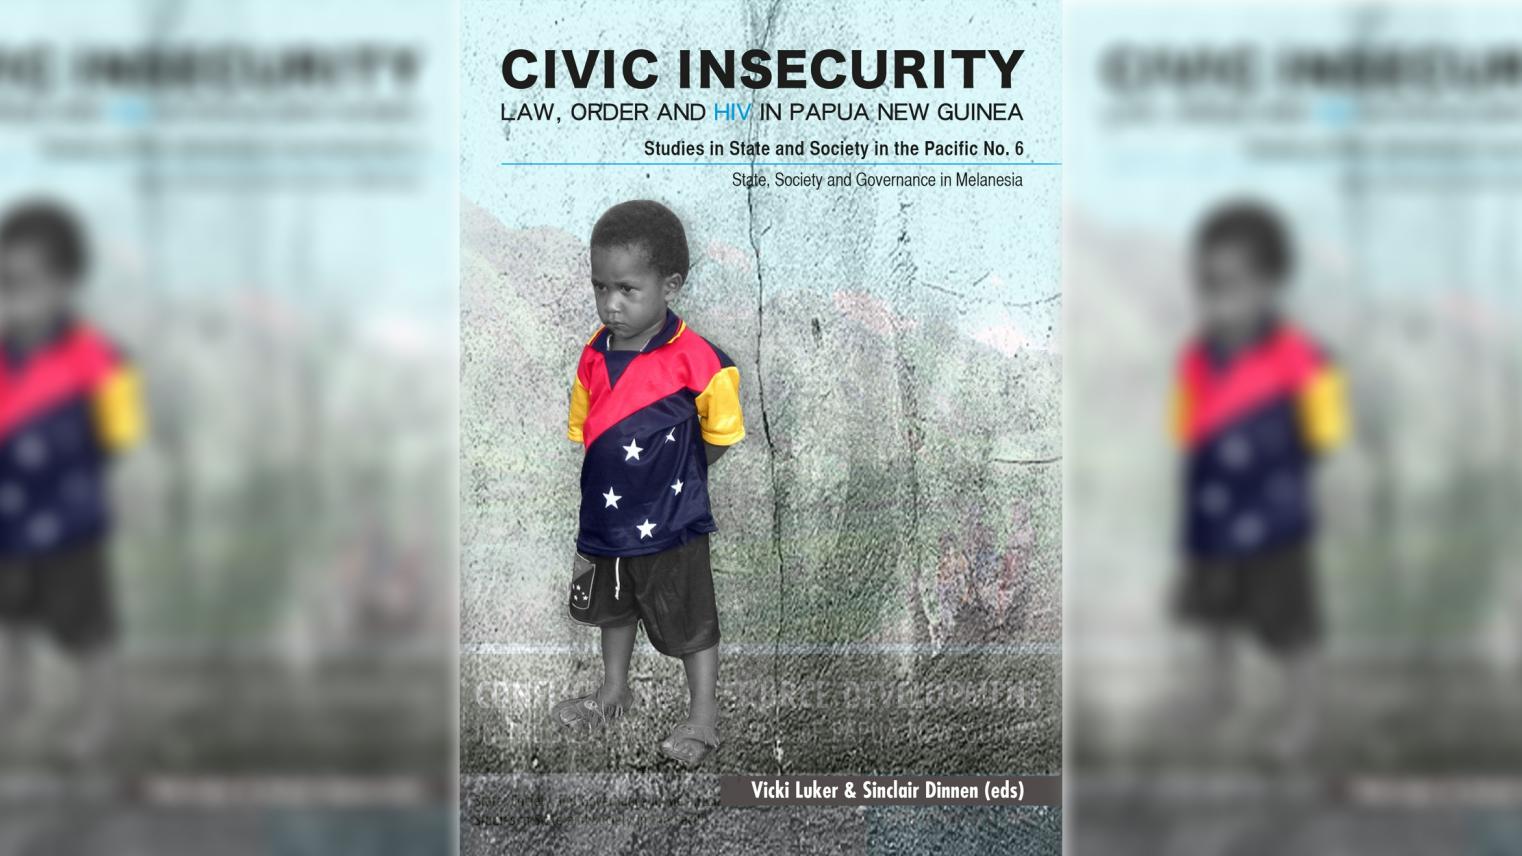 Civic Insecurity Law, Order and HIV in Papua New Guinea